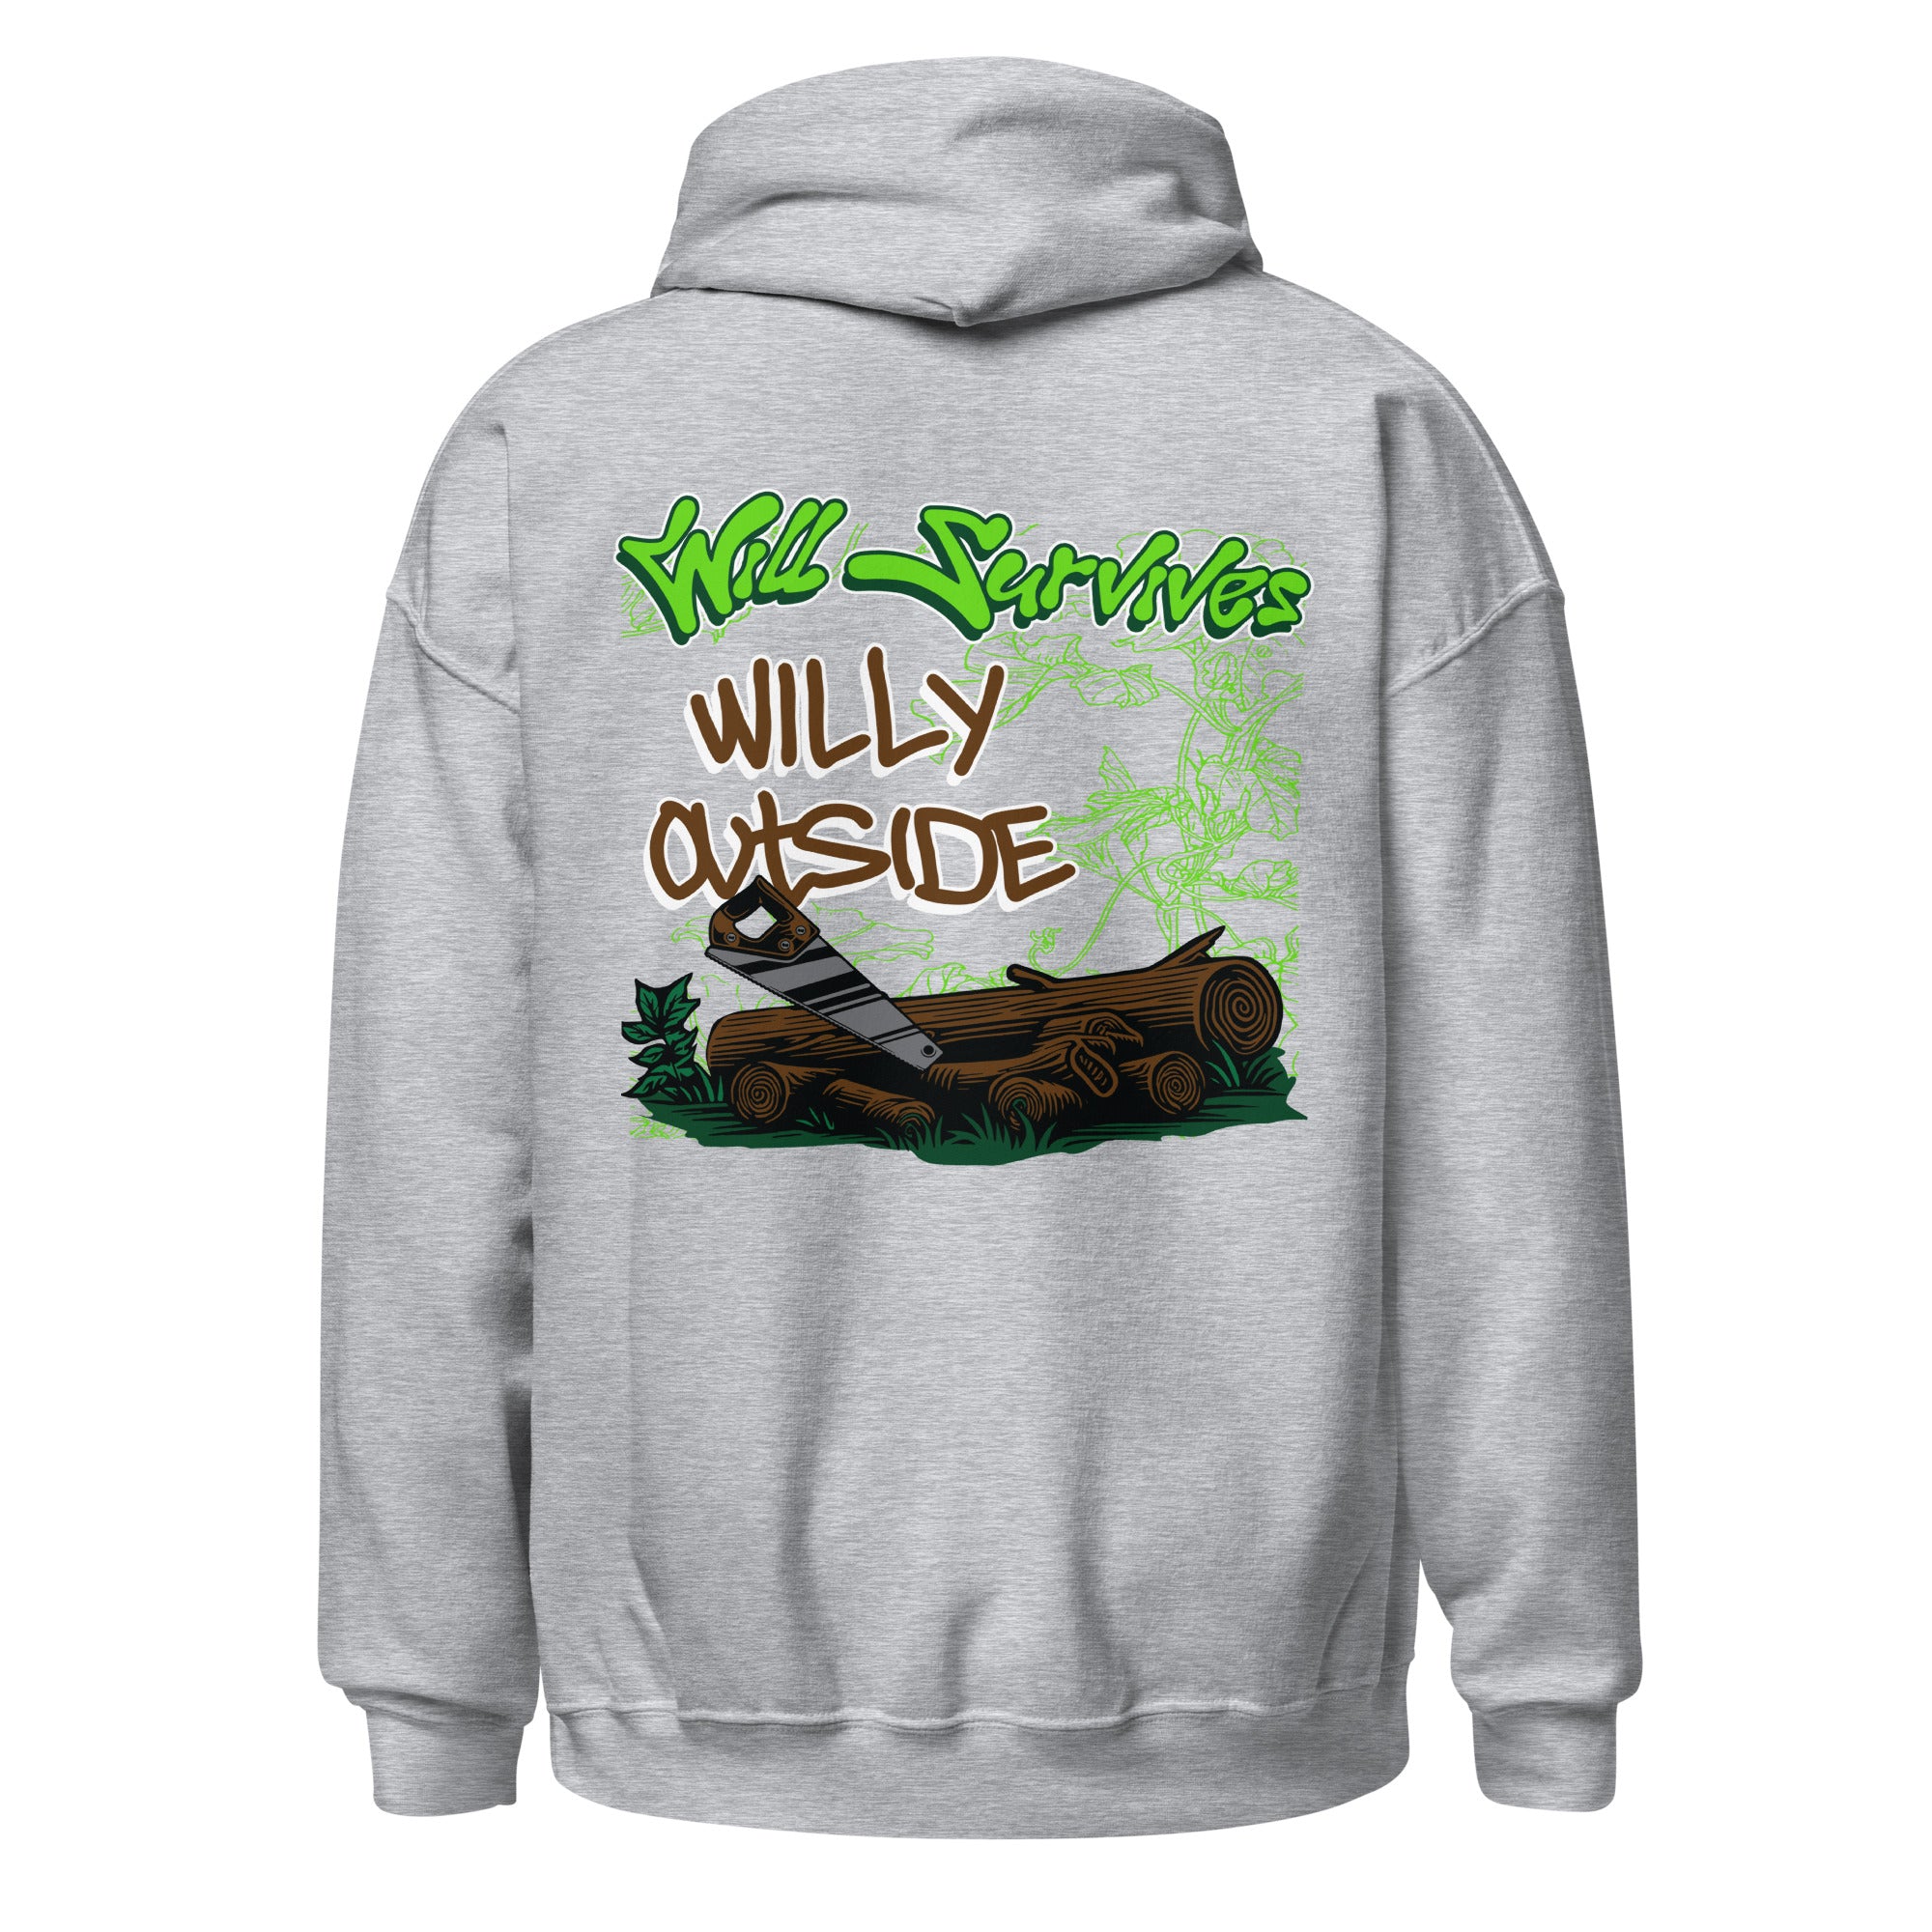 "WILLY OUTSIDE" hoodie